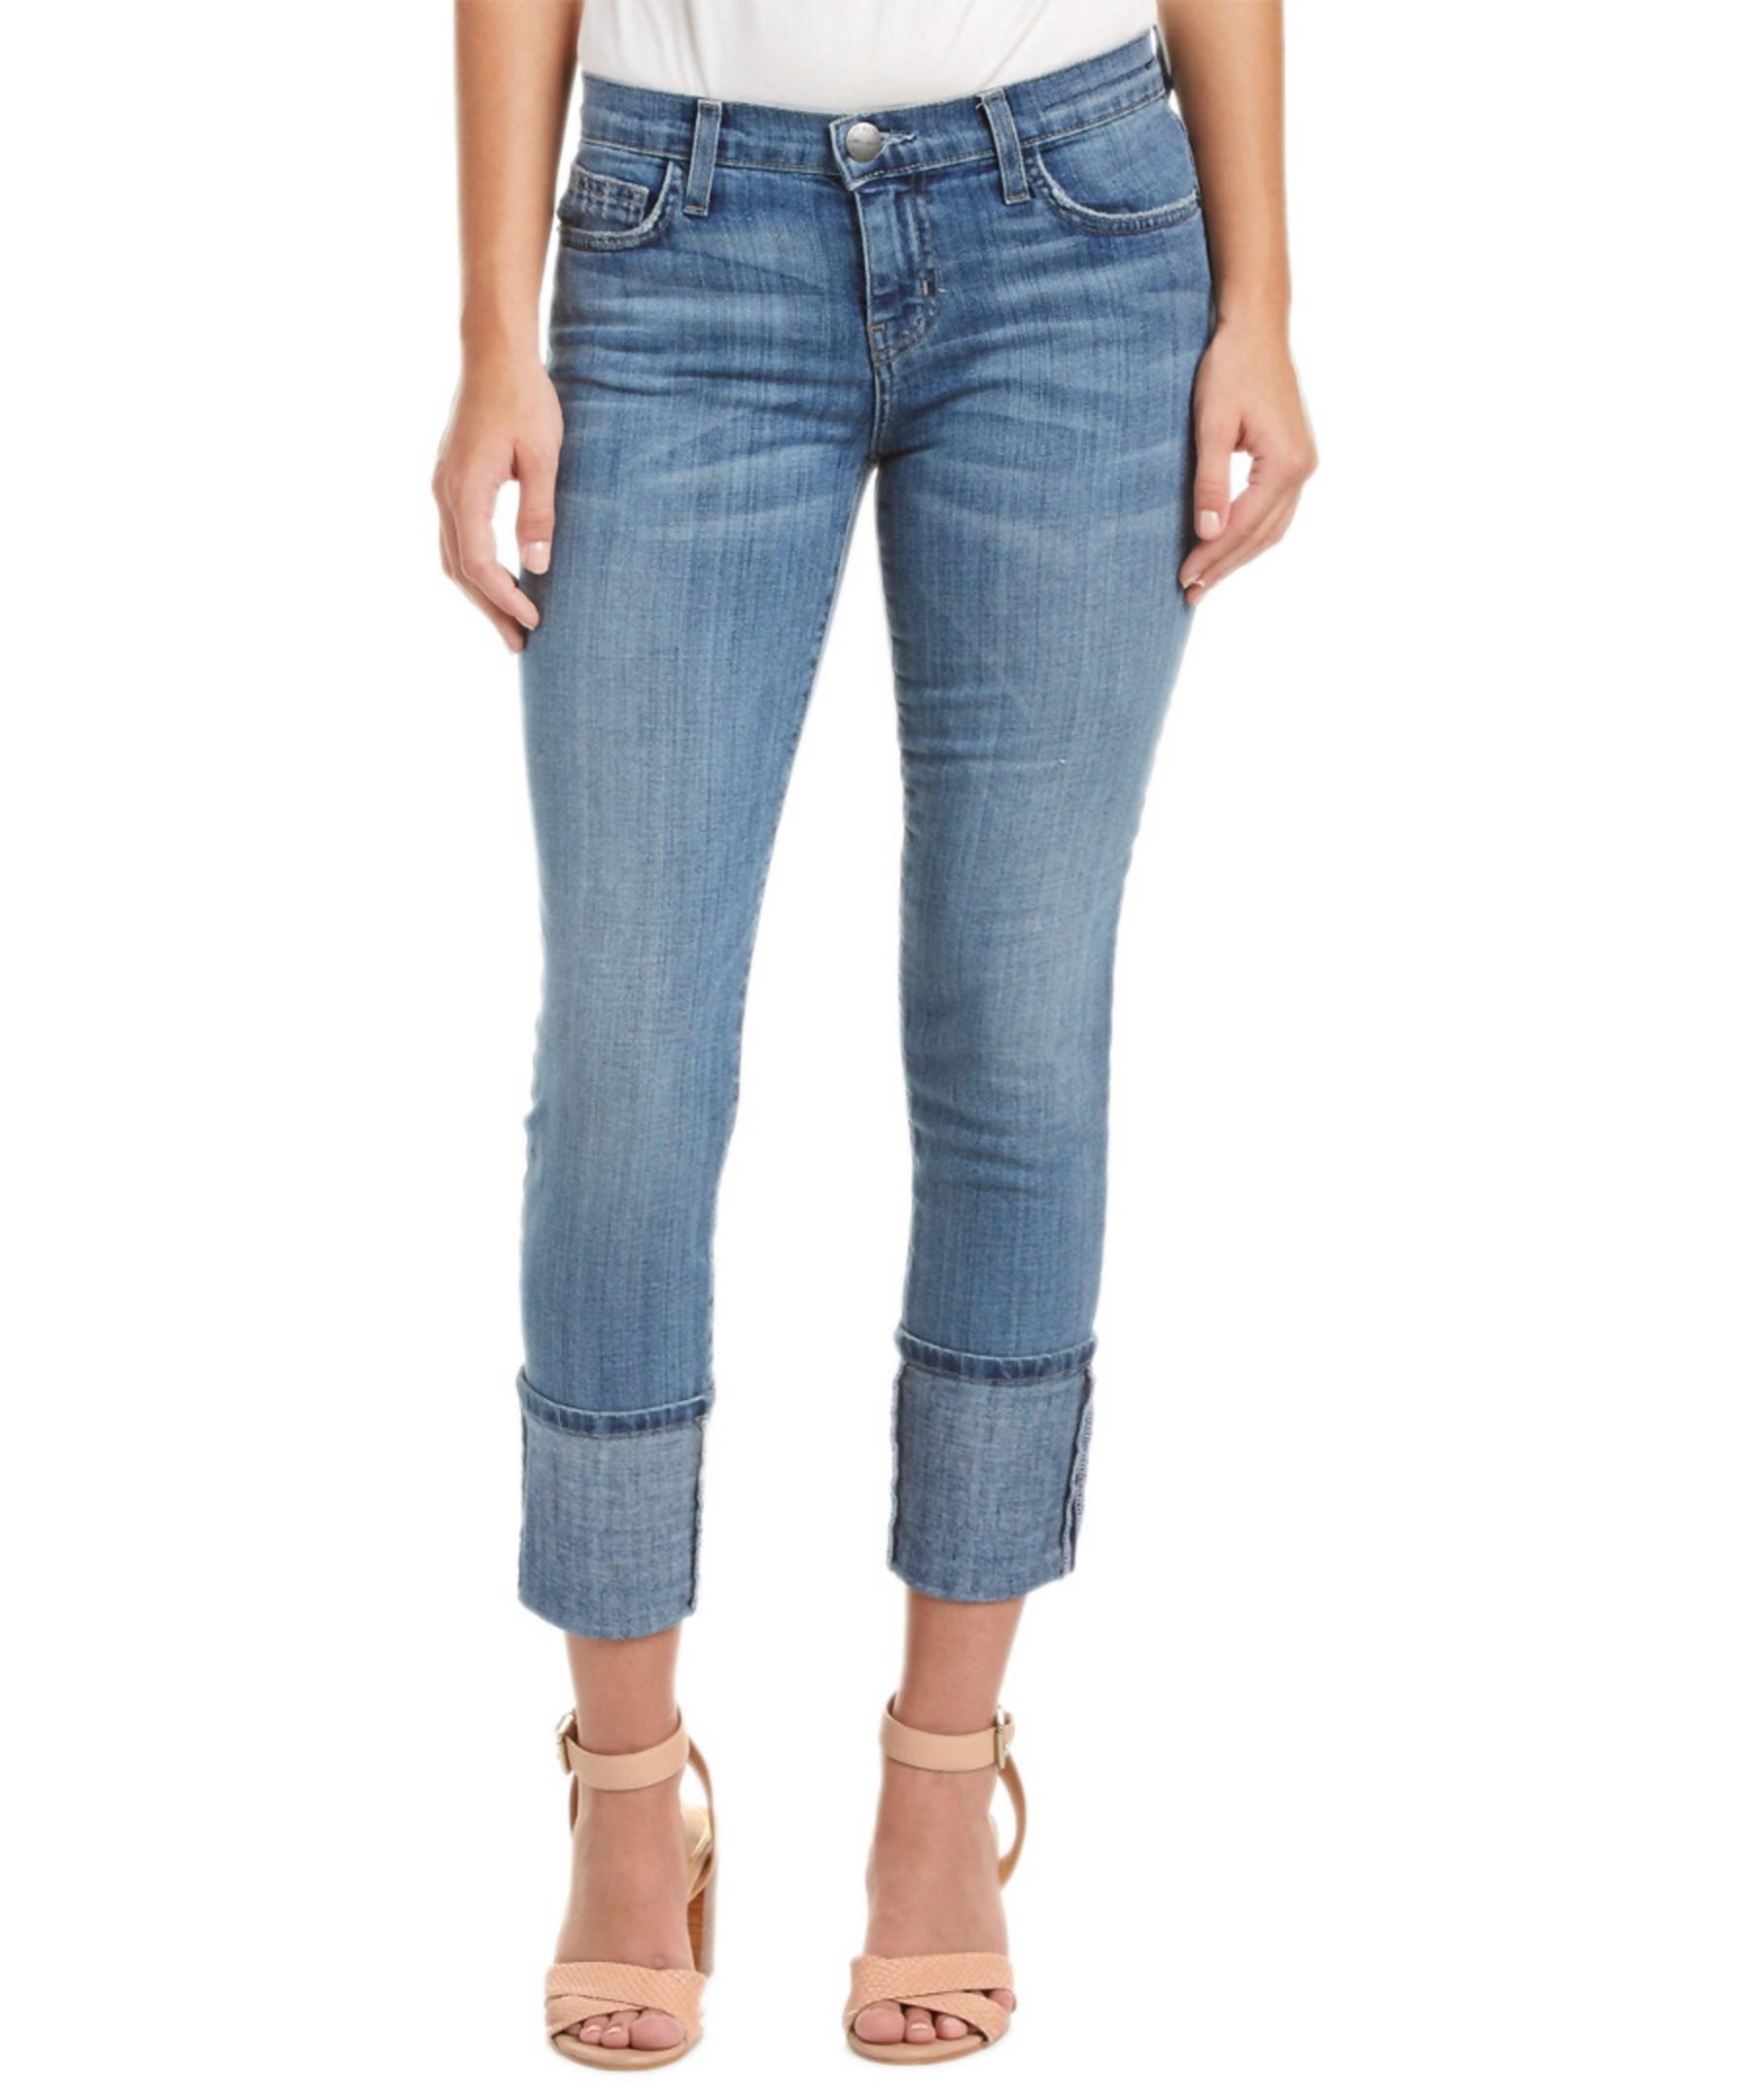 Lyst - Current/Elliott The Cuffed Skinny Jeans in Blue